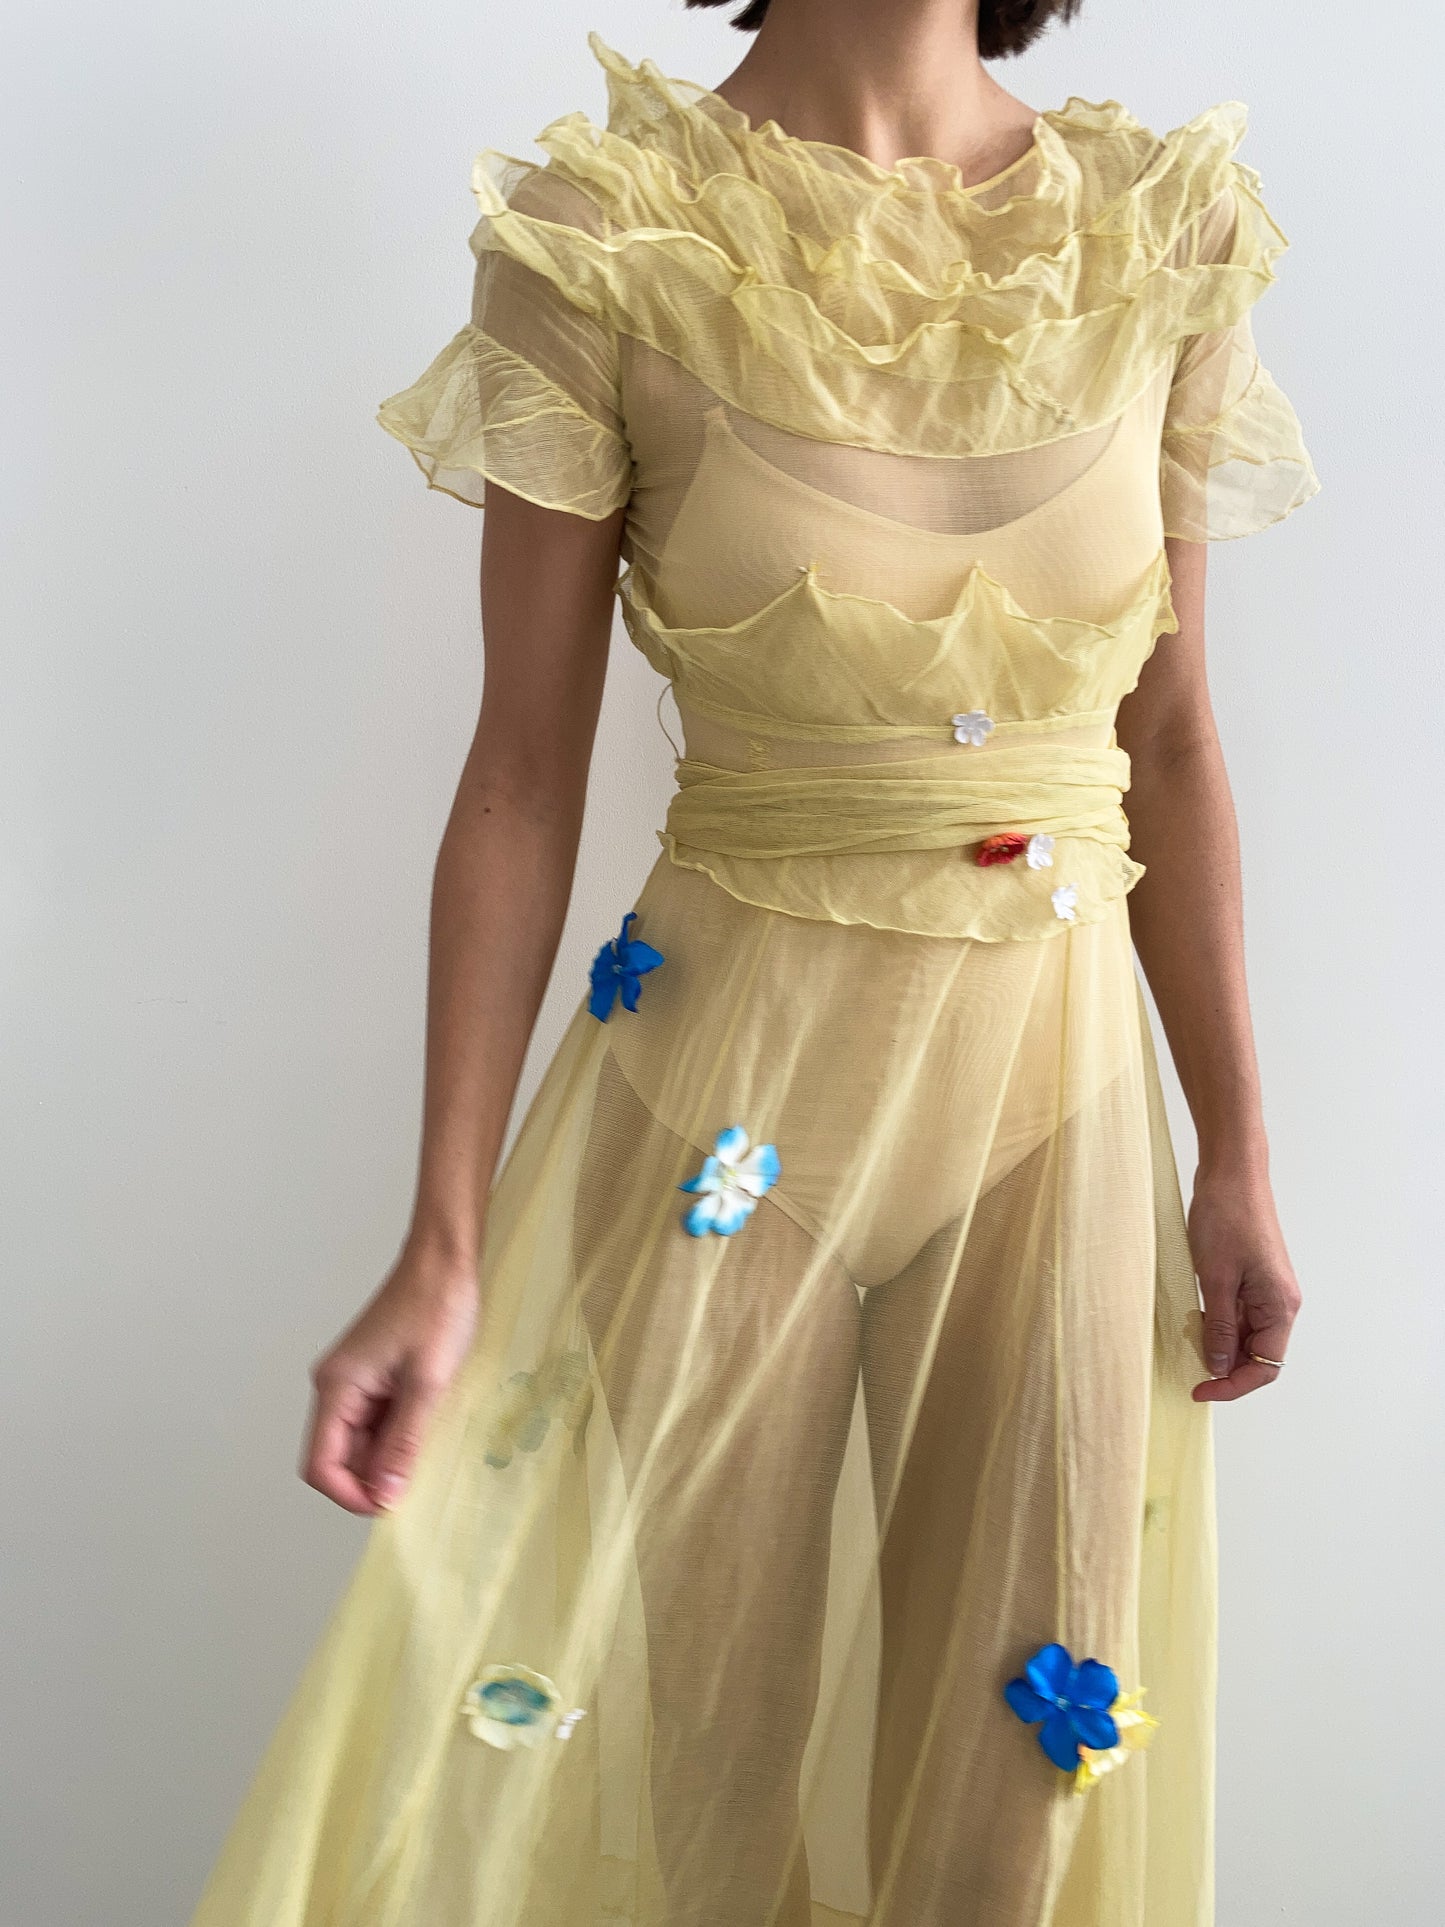 1930s Yellow Floral Ruffled Applique Dress